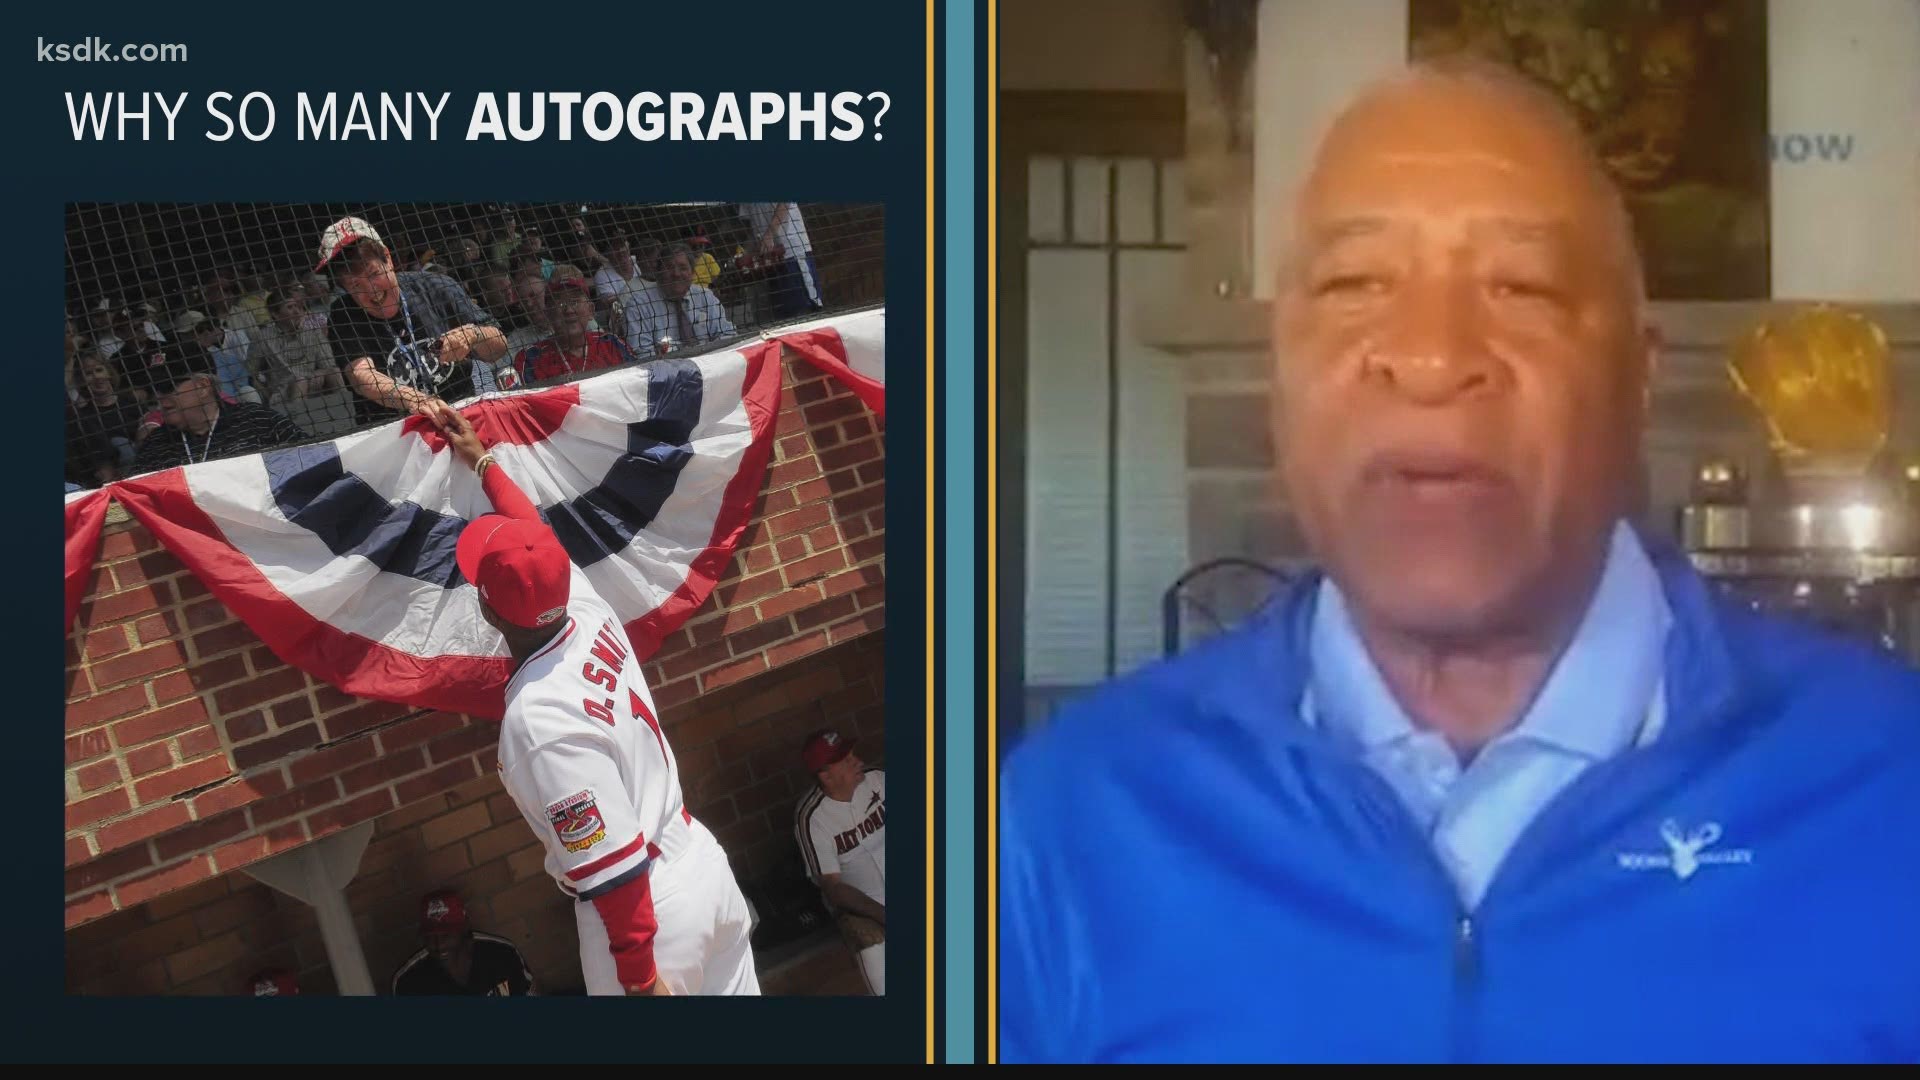 Download Ozzie Smith Wearing St. Louis Cardinals Wallpaper